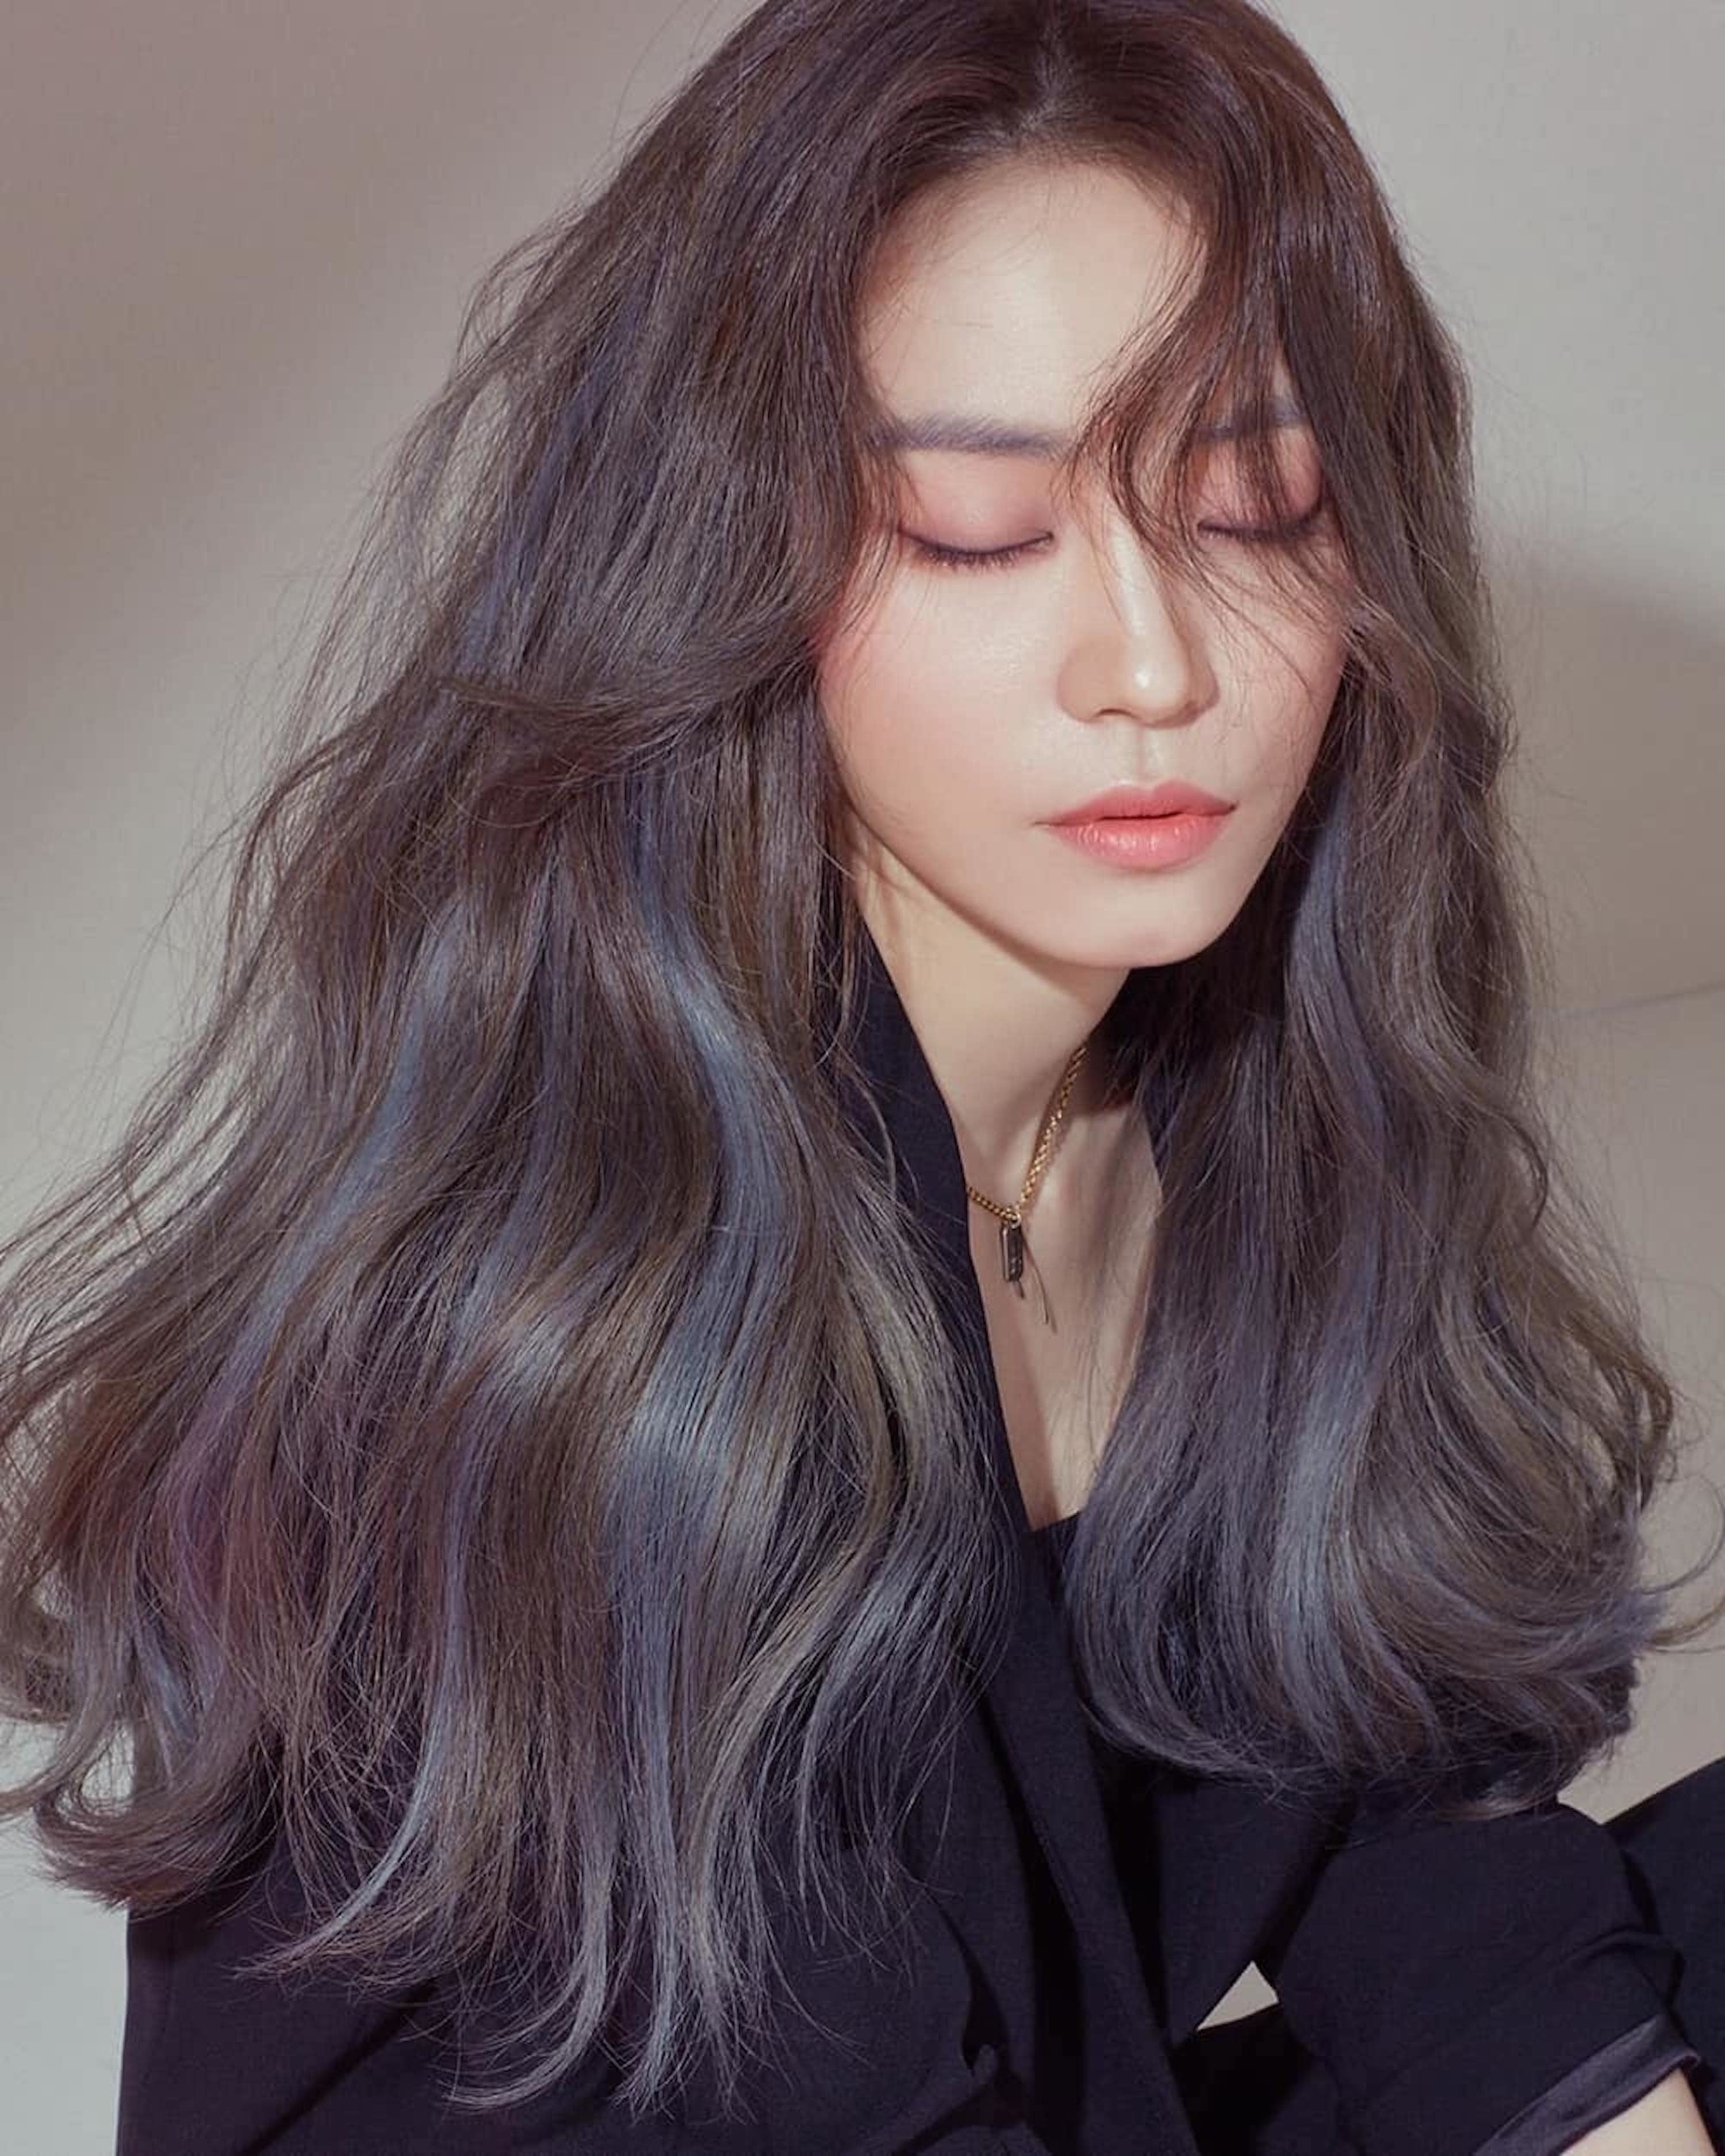 The Top Hair-Color Trends In Korea For 2019, According To Pros | Allure pertaining to Amazing Asian Hairstyles And Colors